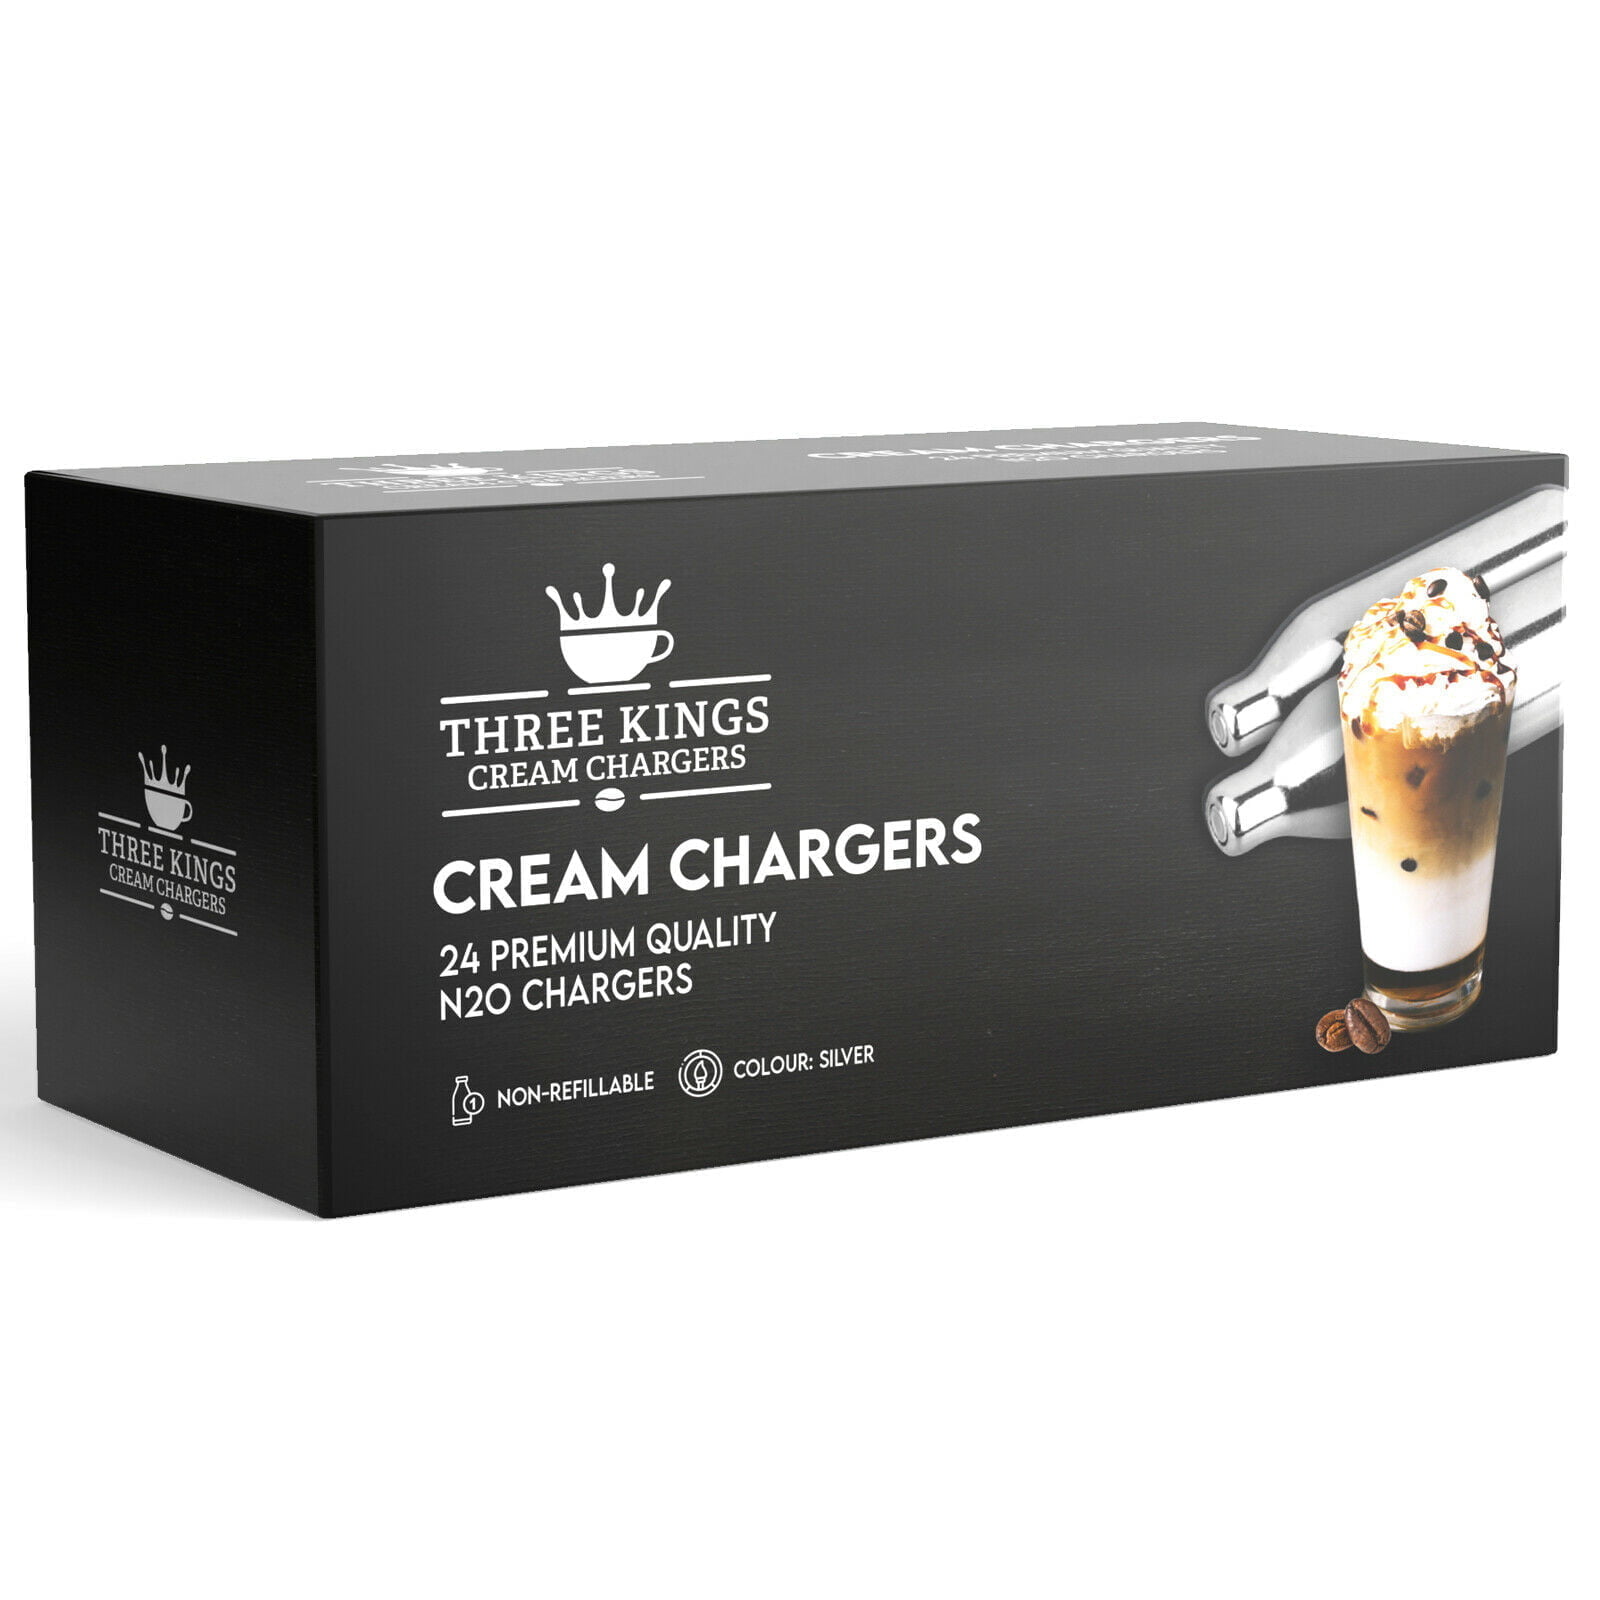 Three King Cream Chargers